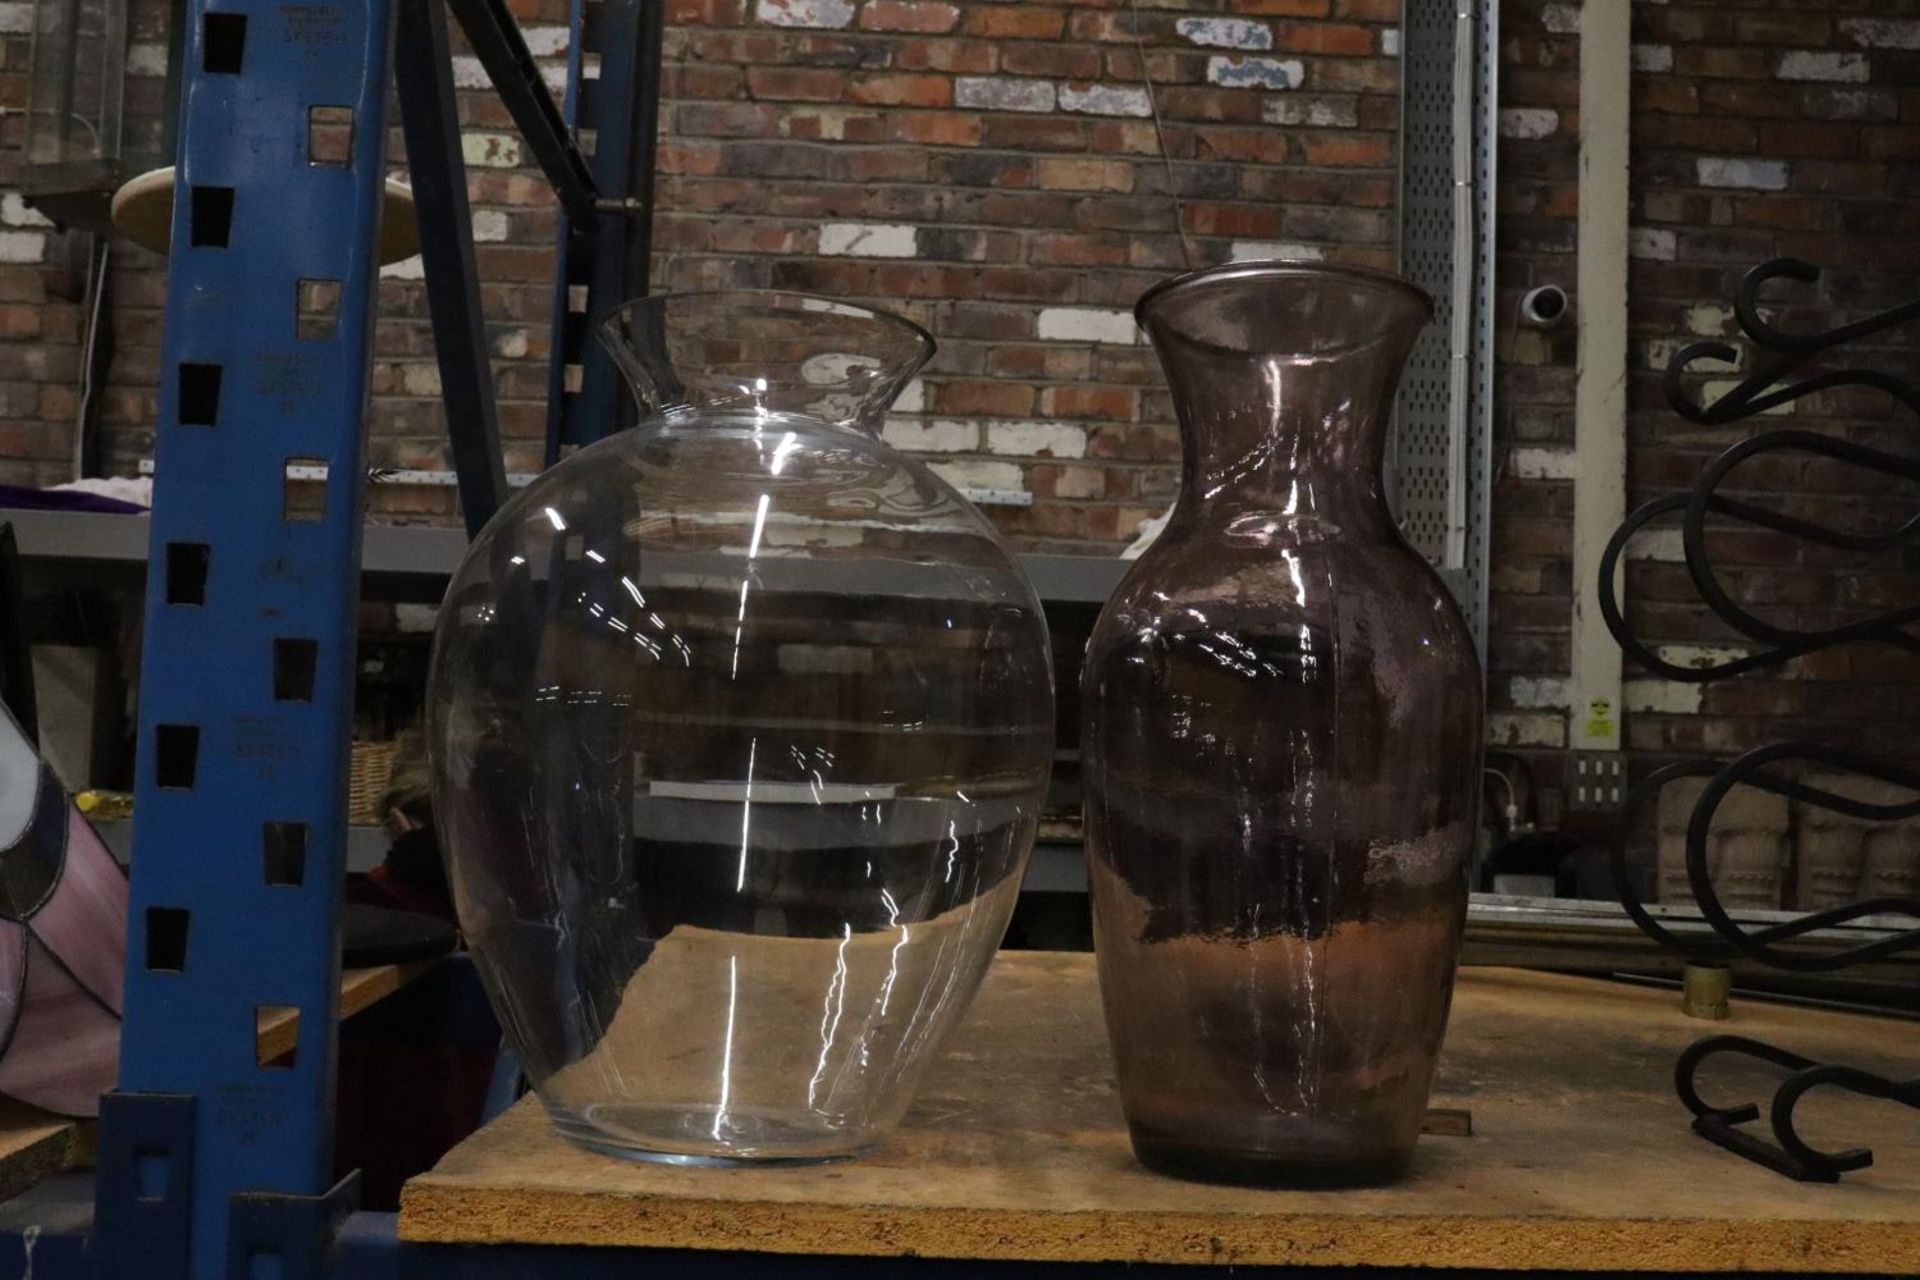 TWO LARGE GLASS VASES, 43CM AND 45CM